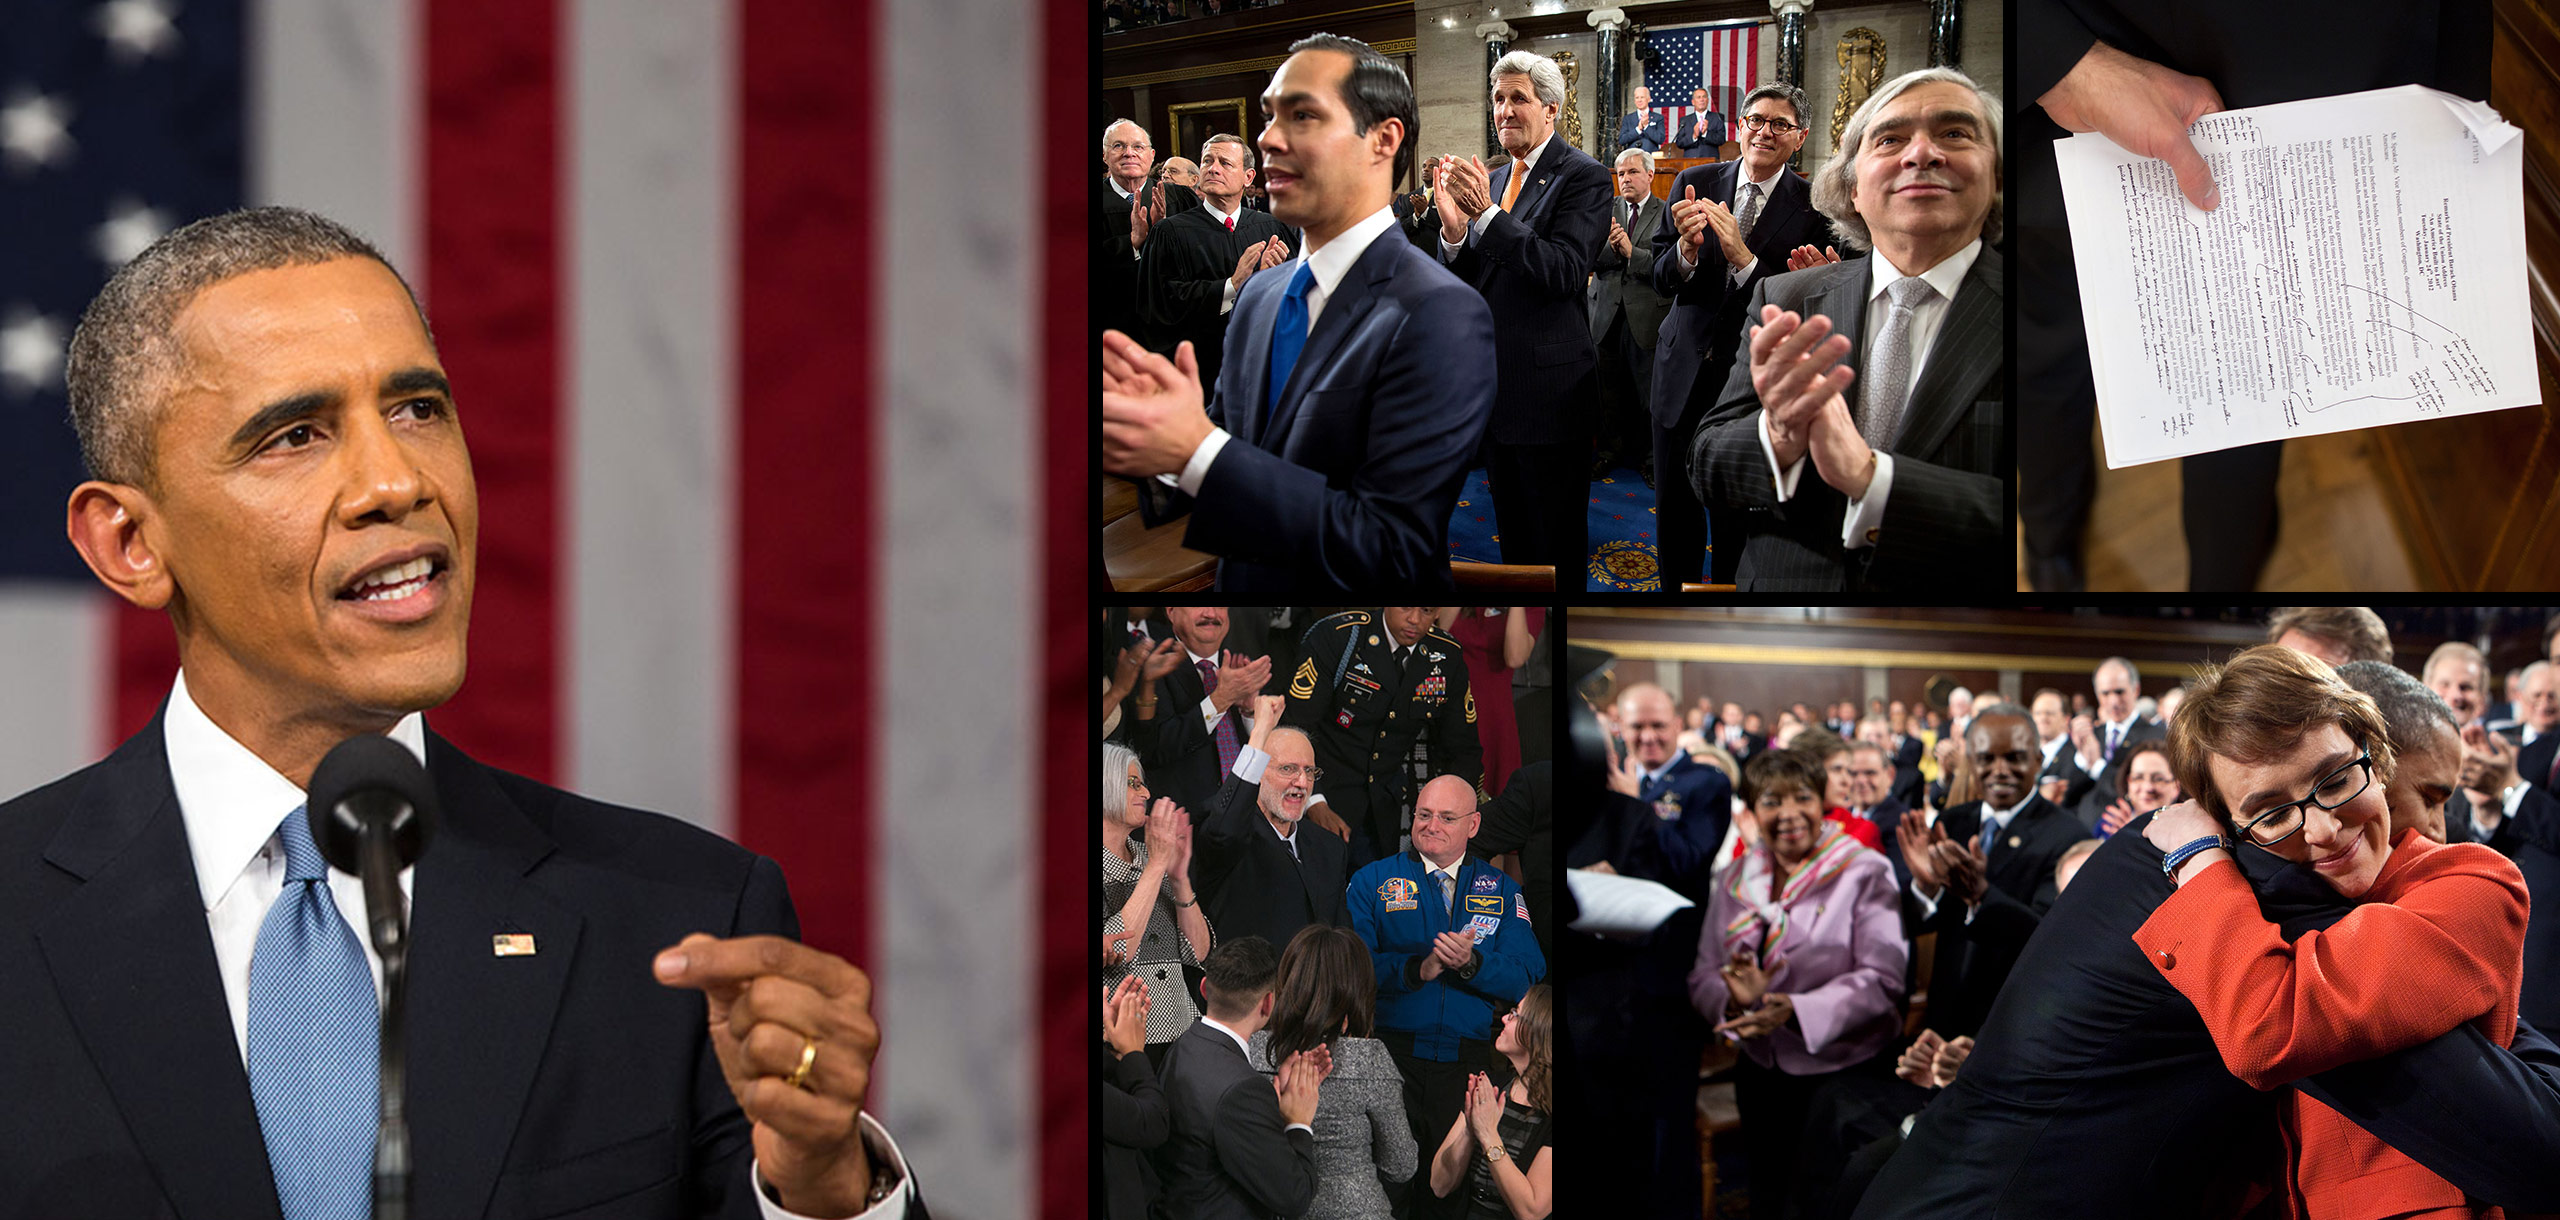 Collage of photos from previous State of the Union Addresses.